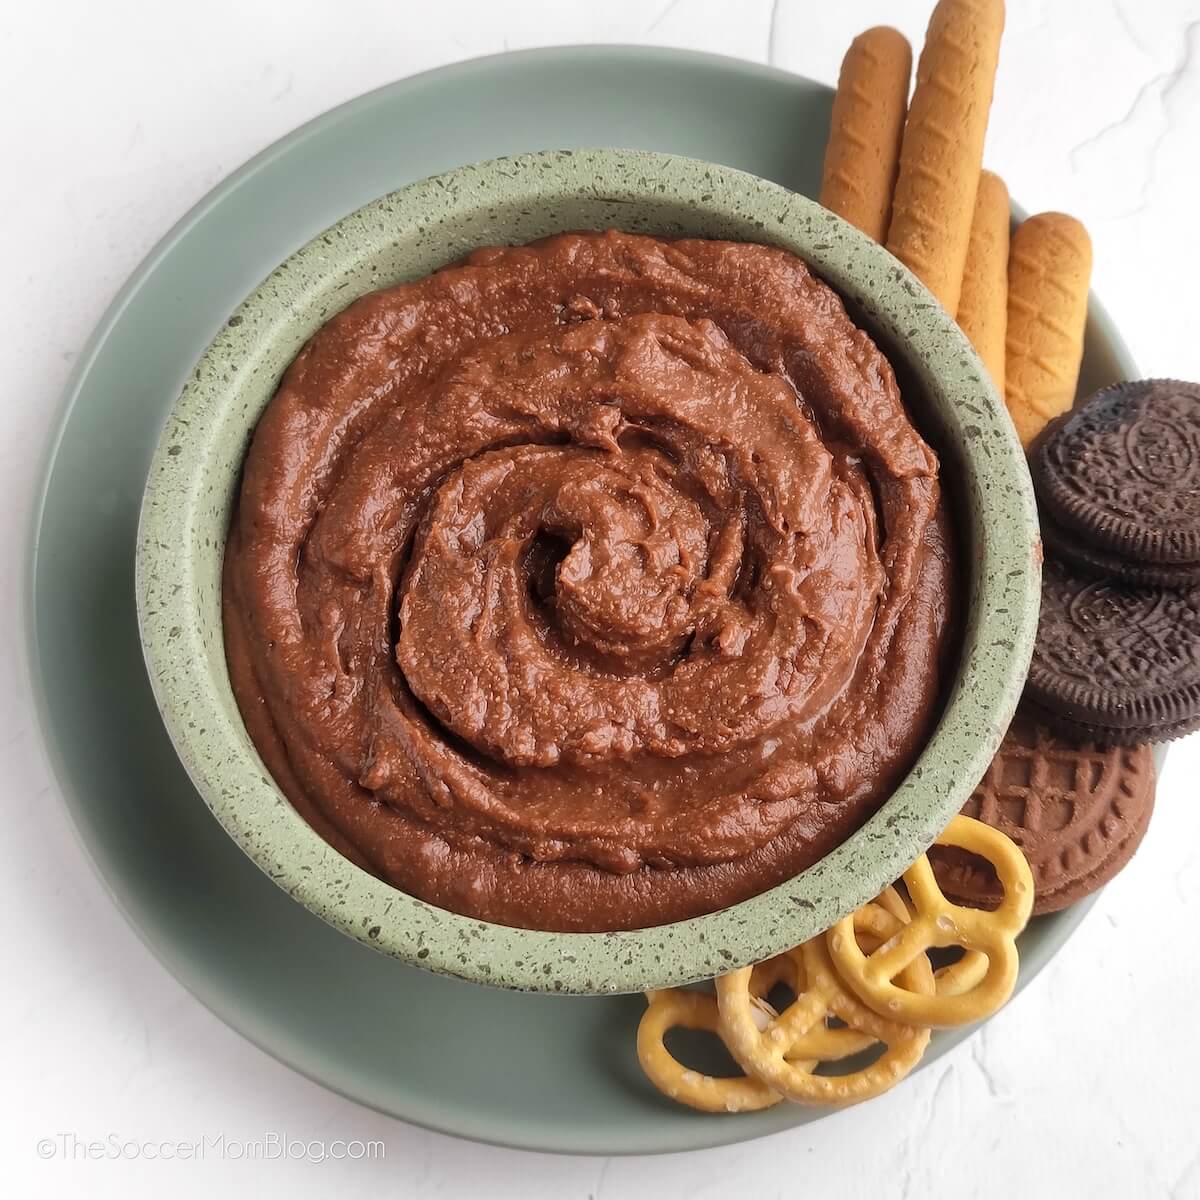 small bowl of chocolate hummus, with cookies and pretzels for dipping